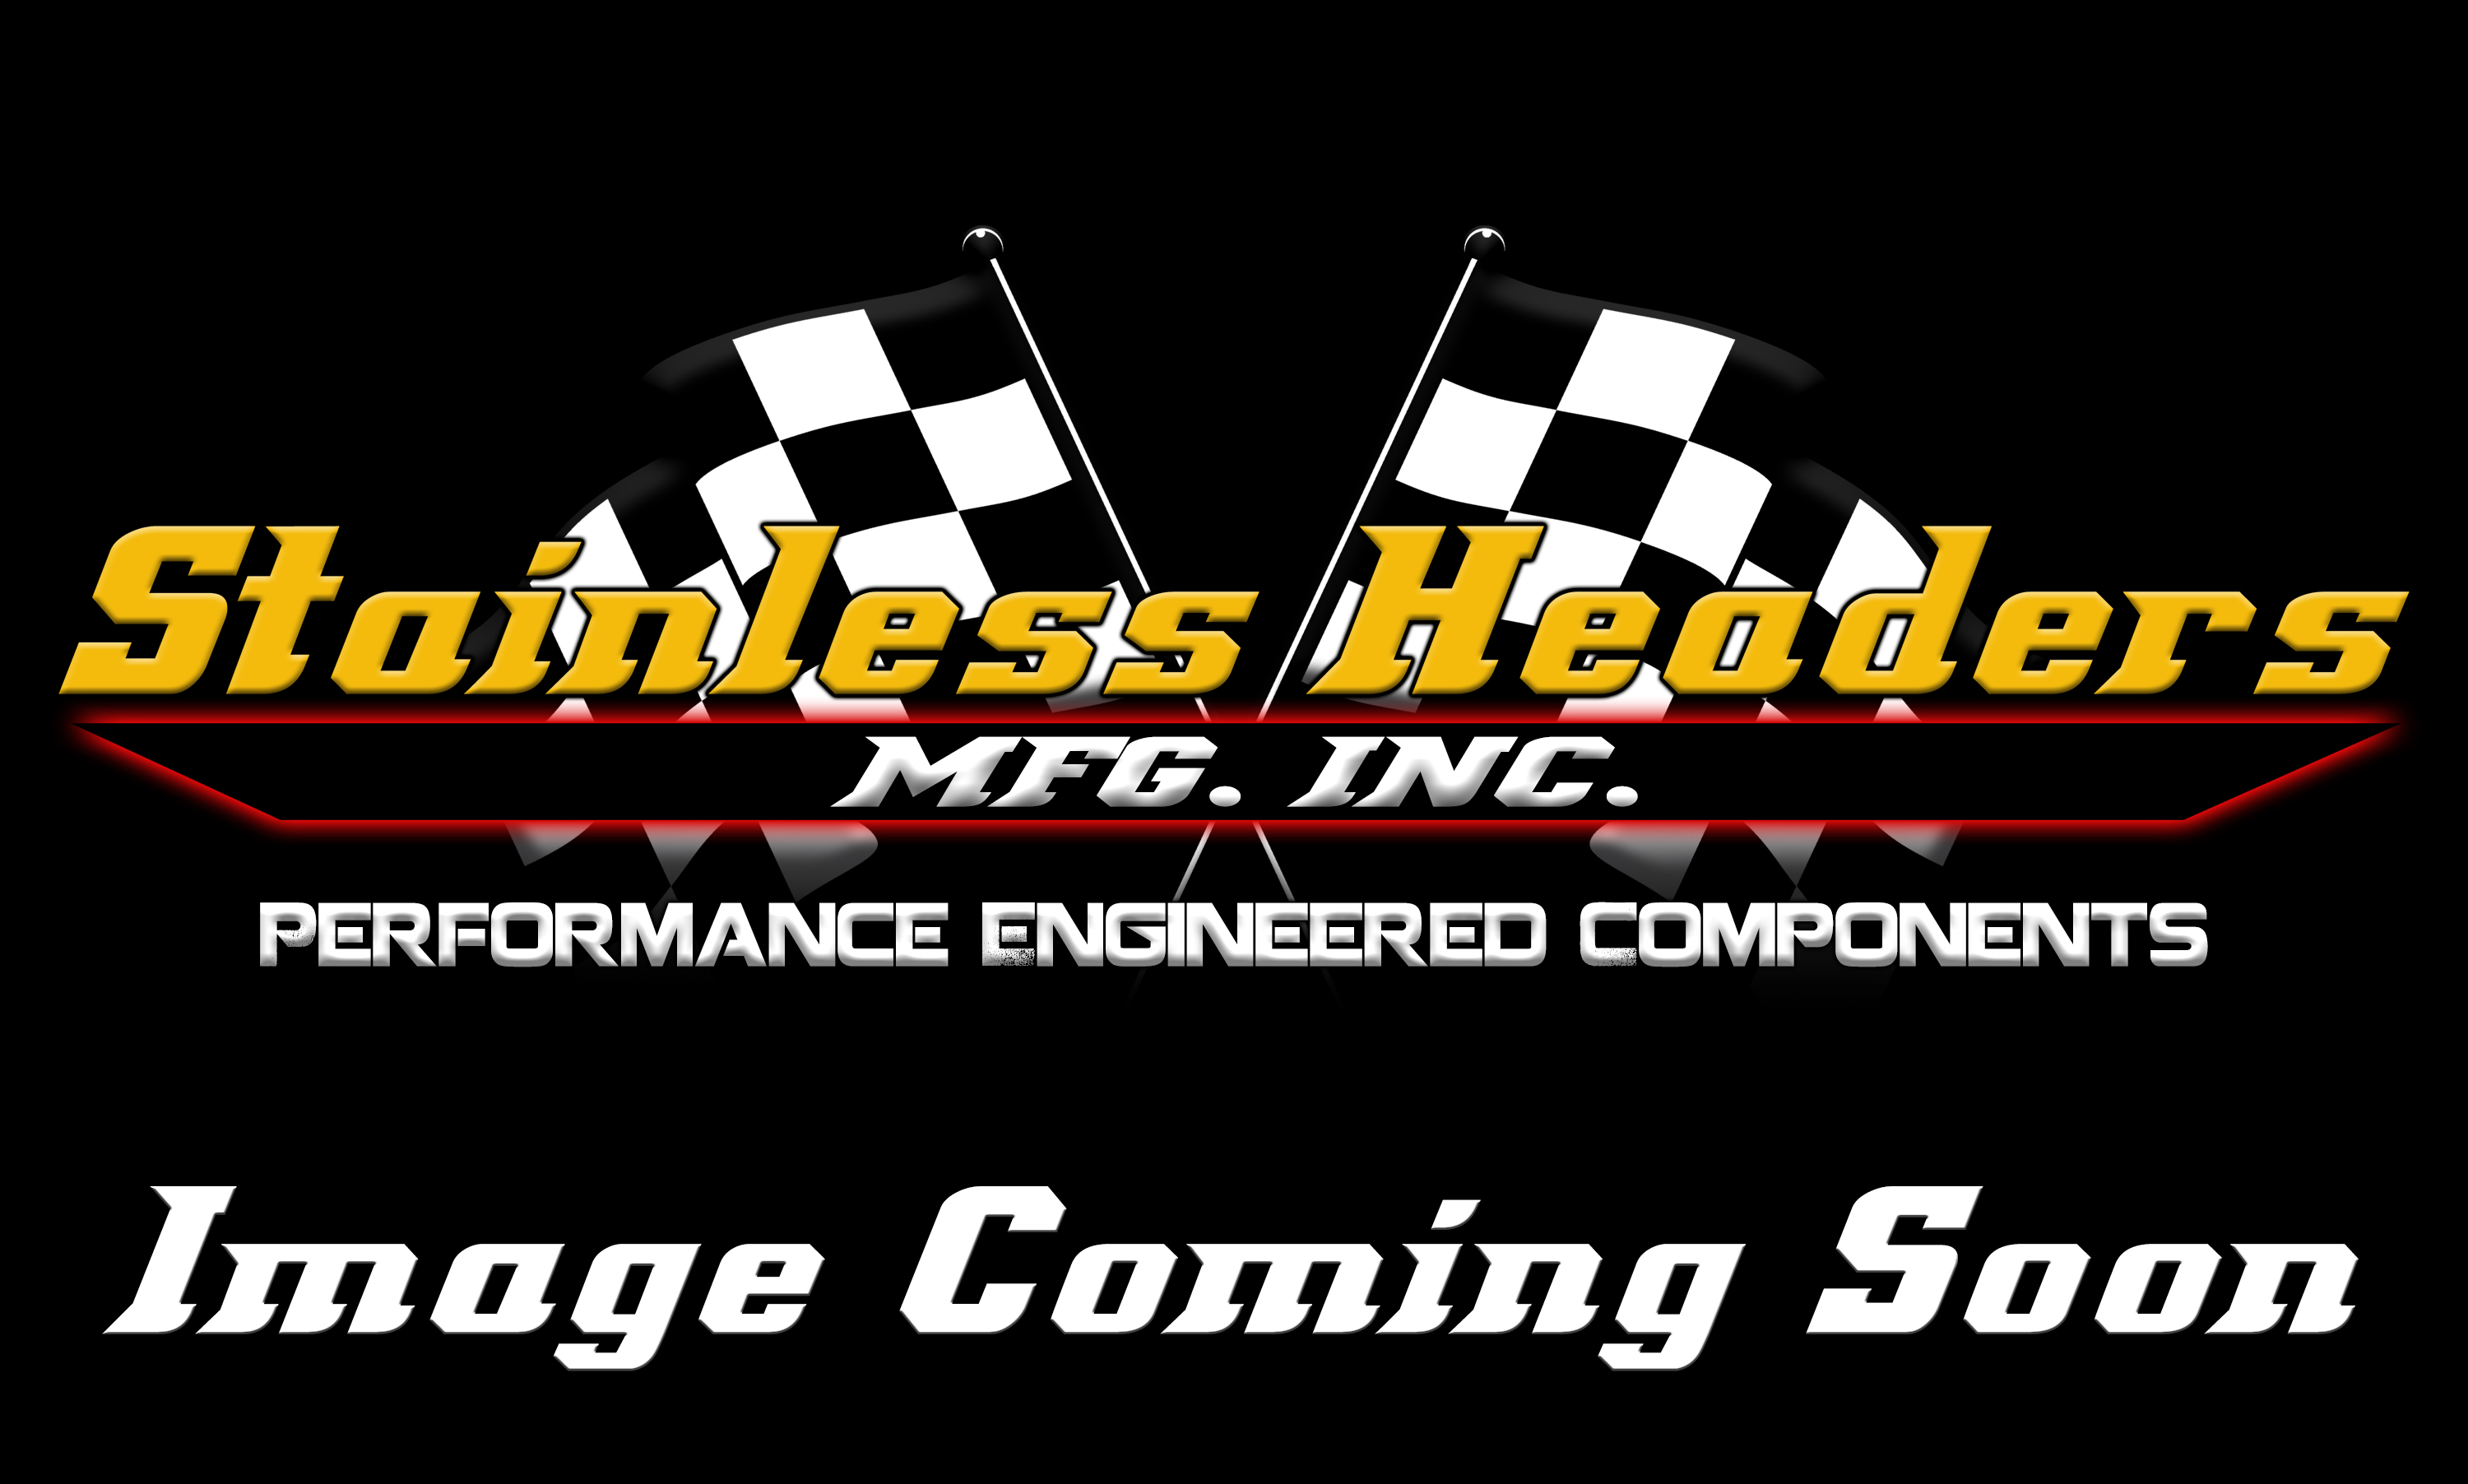 Stainless Headers - 2" Primary 2 into 1 Performance Merge Collector-16ga 321ss - Image 3